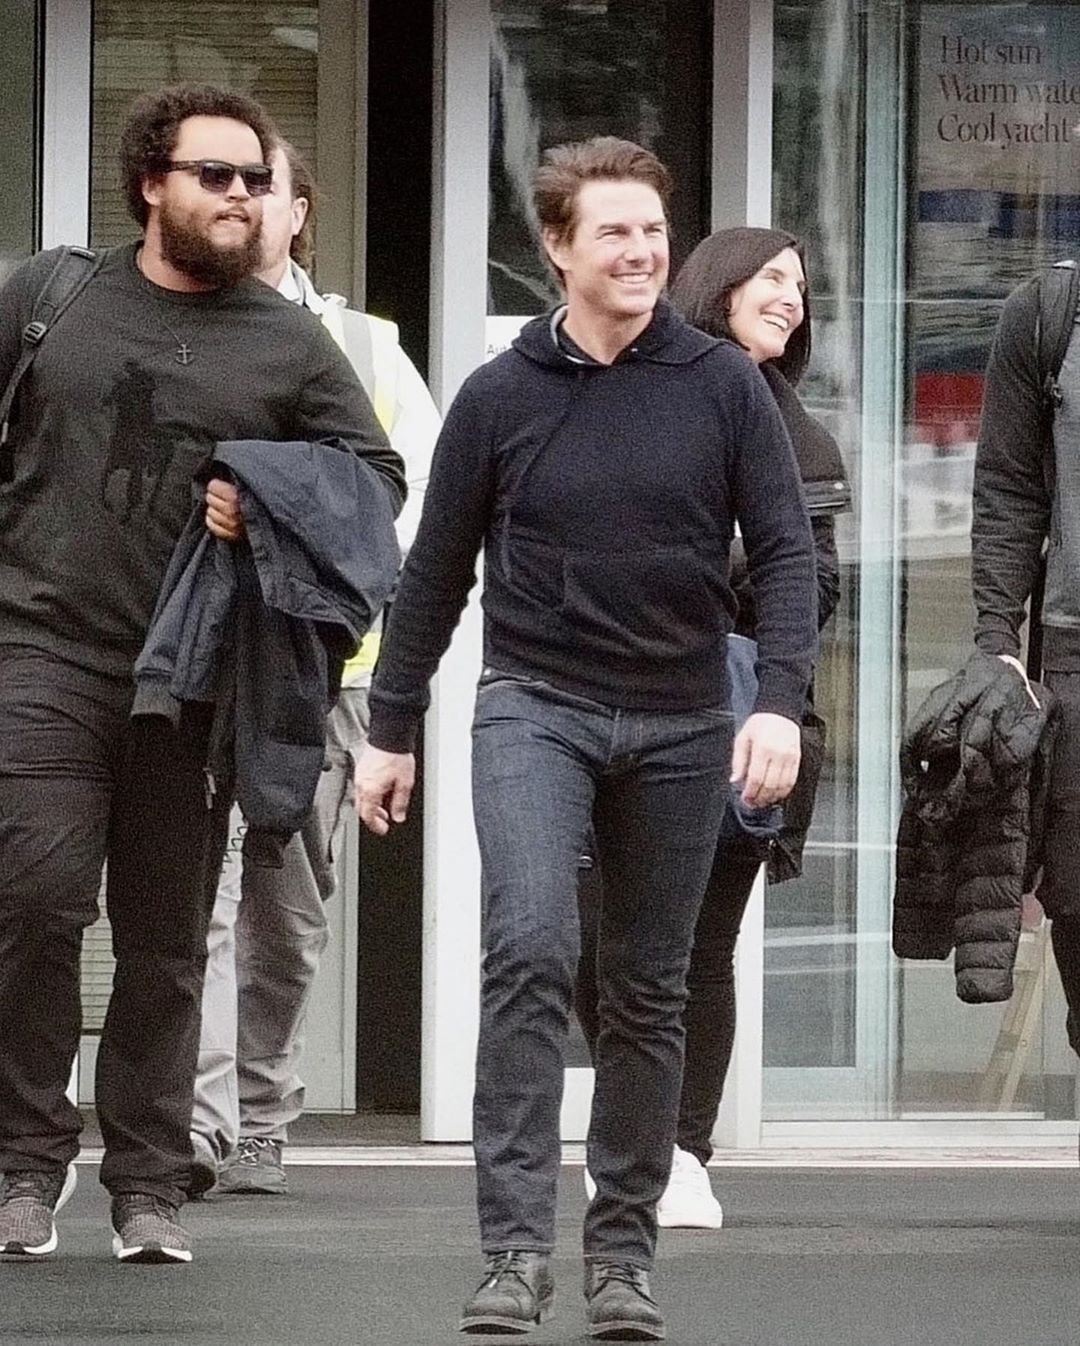 Tom Cruise Makes A Rare Appearance With His Son Connor Cruise In London